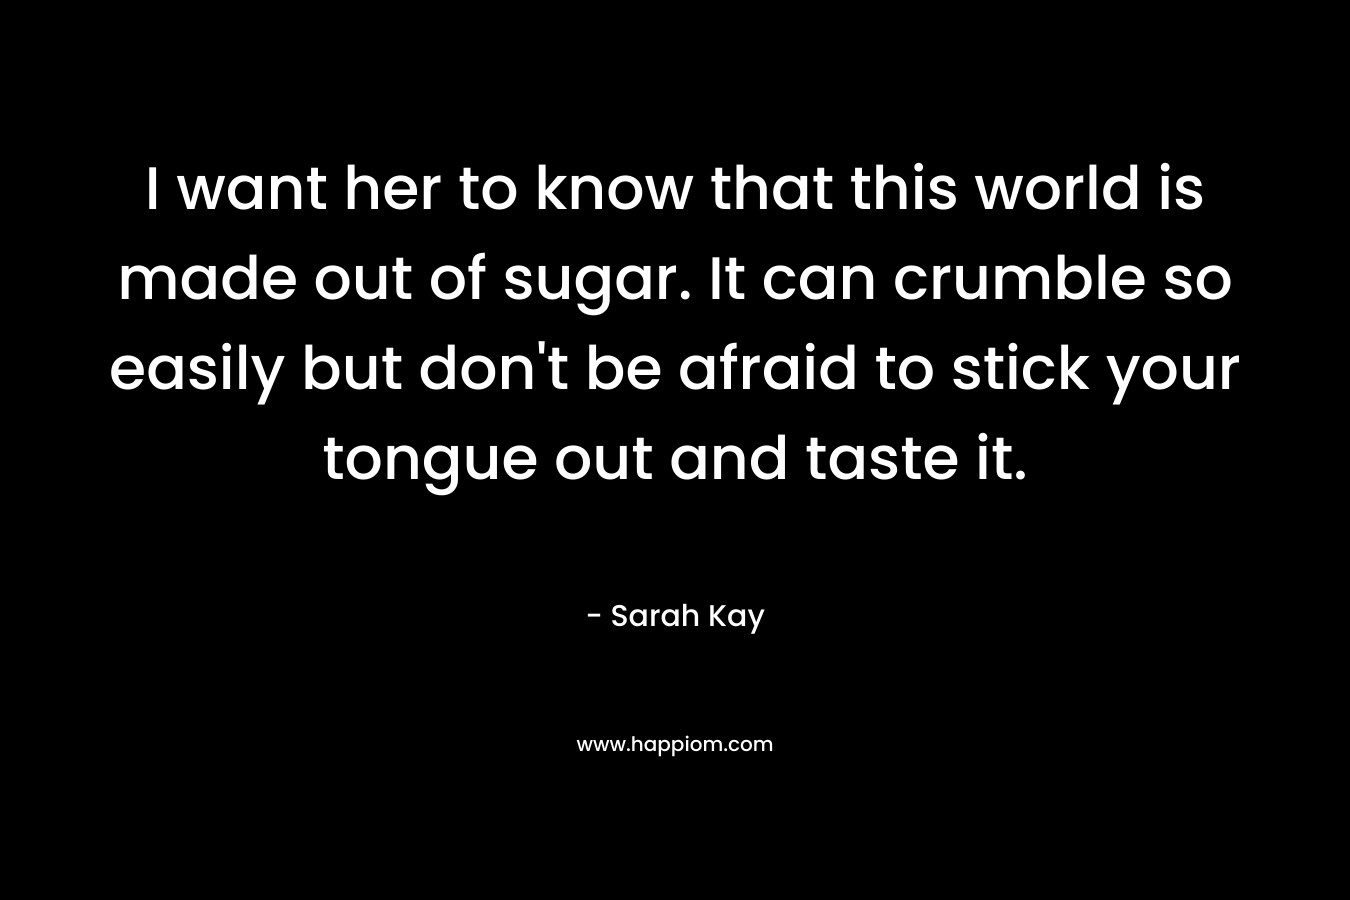 I want her to know that this world is made out of sugar. It can crumble so easily but don't be afraid to stick your tongue out and taste it.